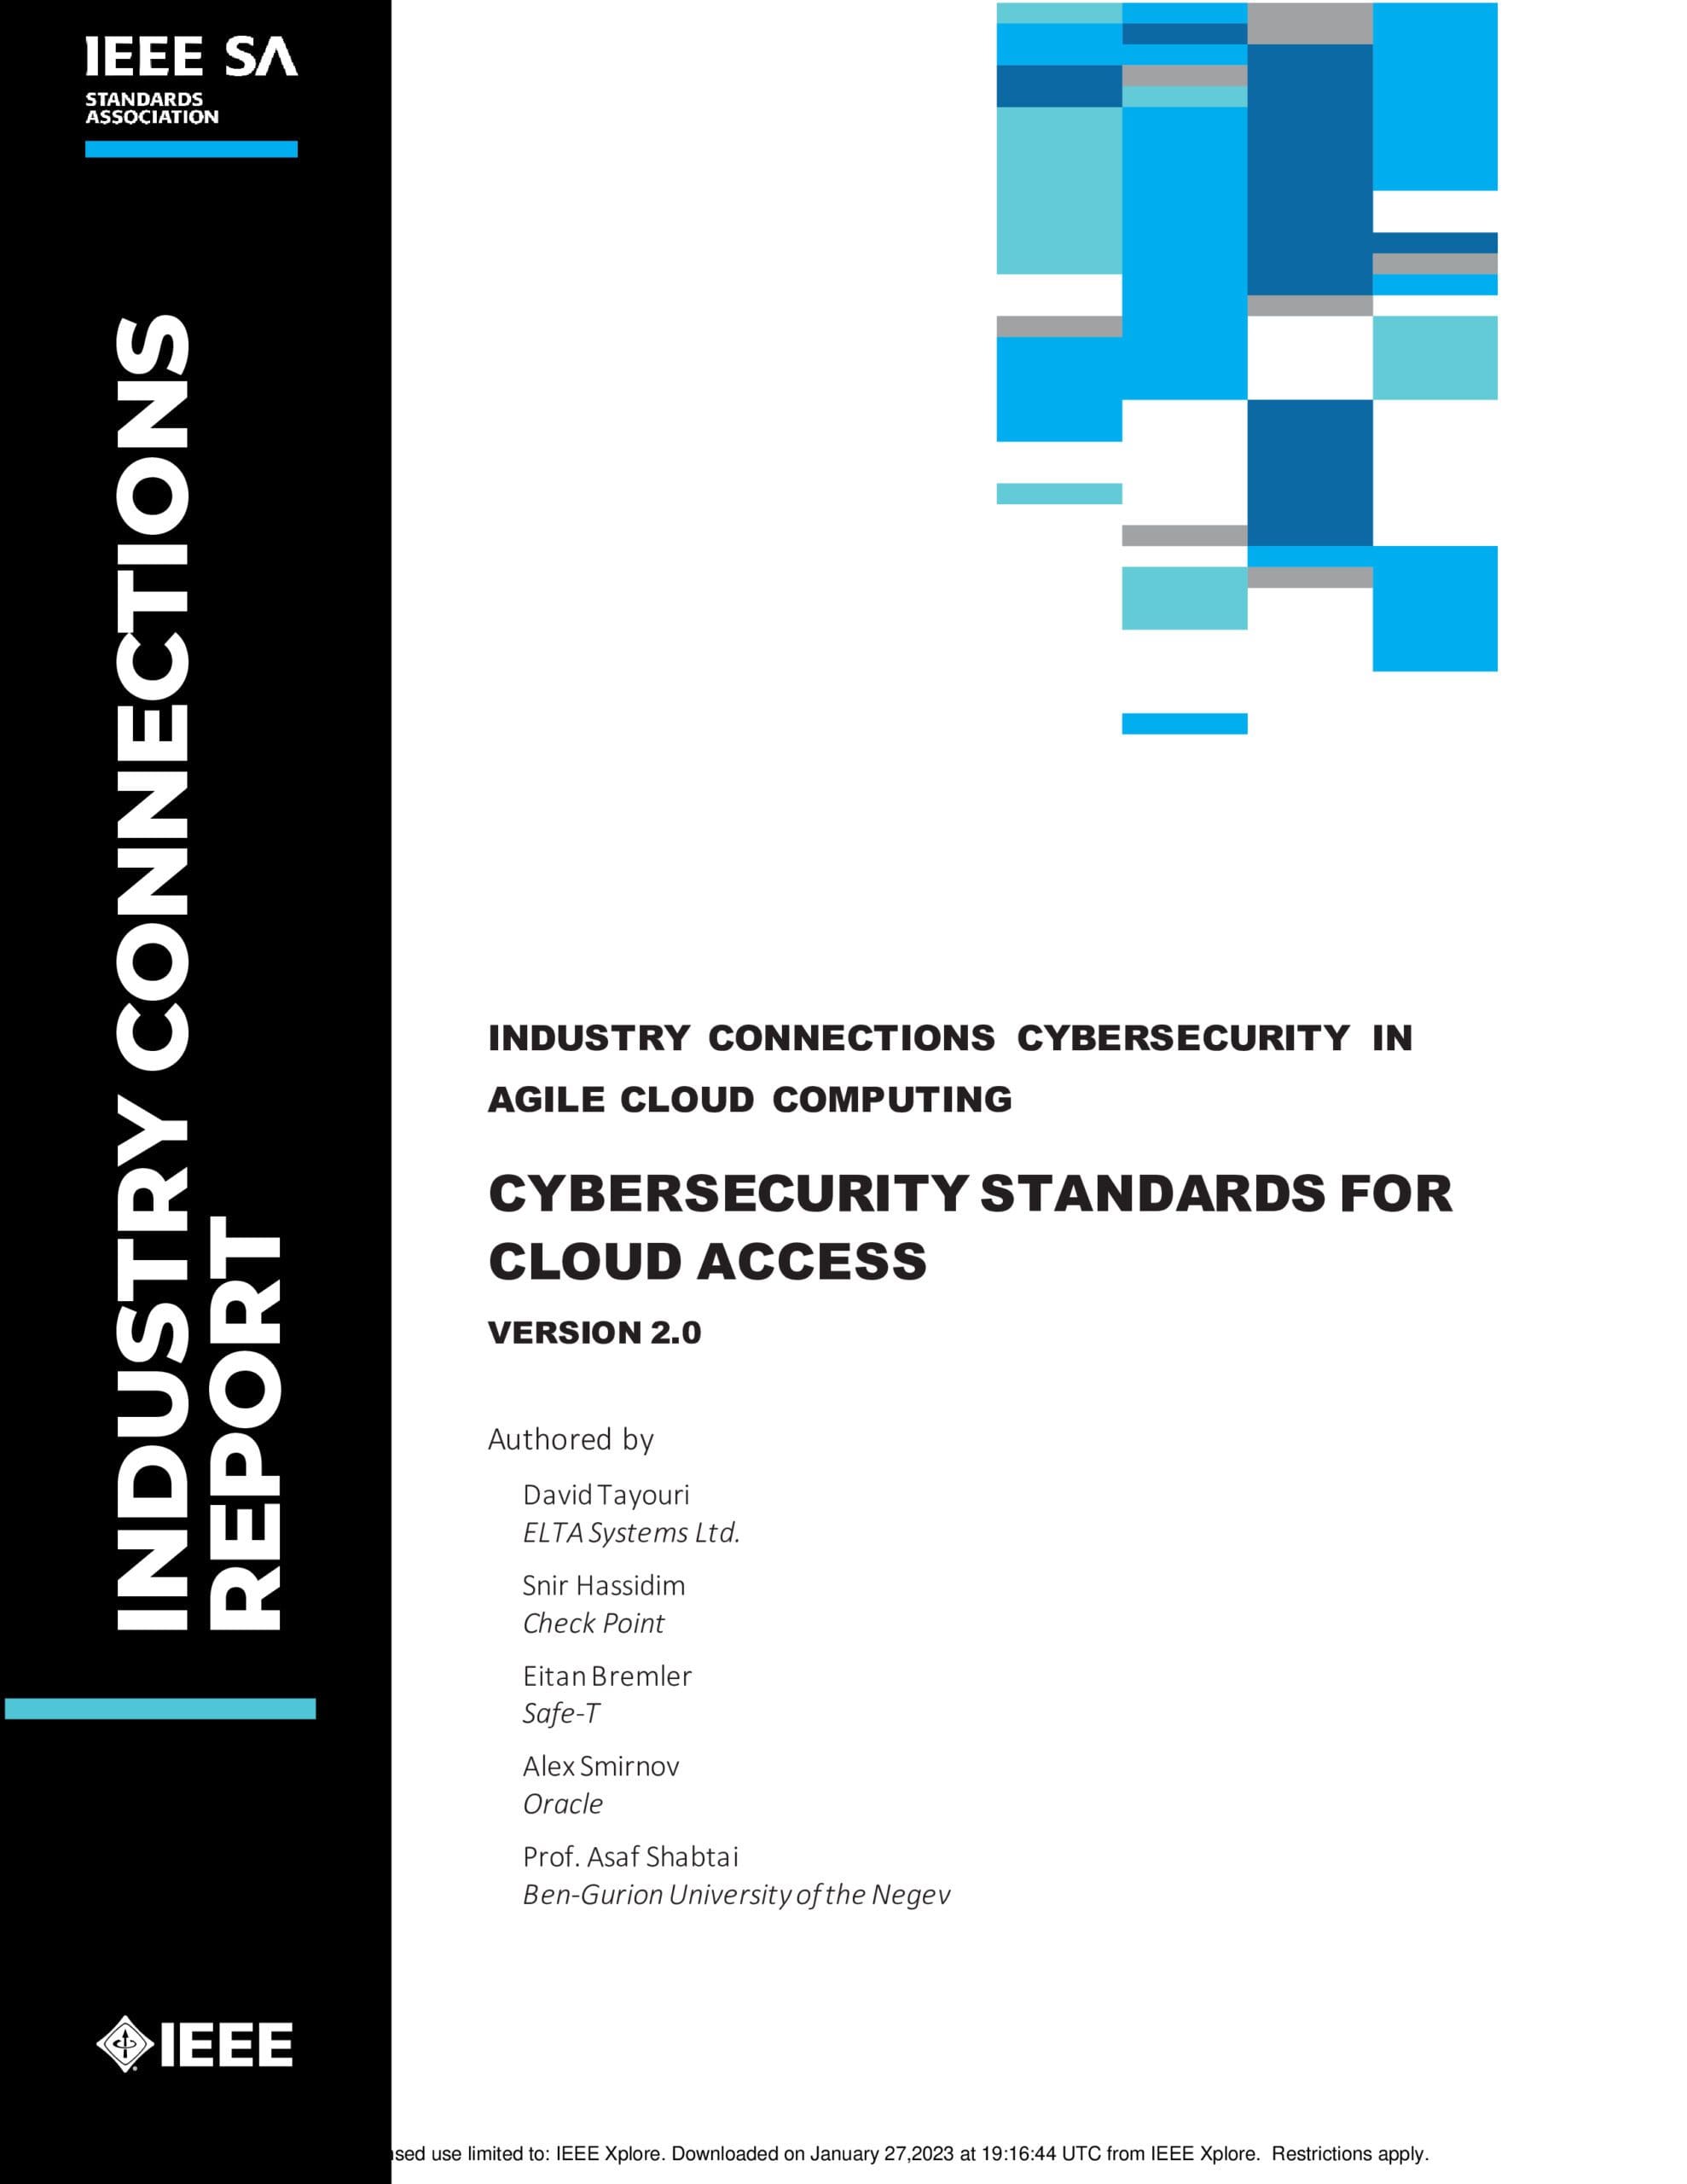 IEEE SA CyberSecurity Standards for Cloud Access Version 2